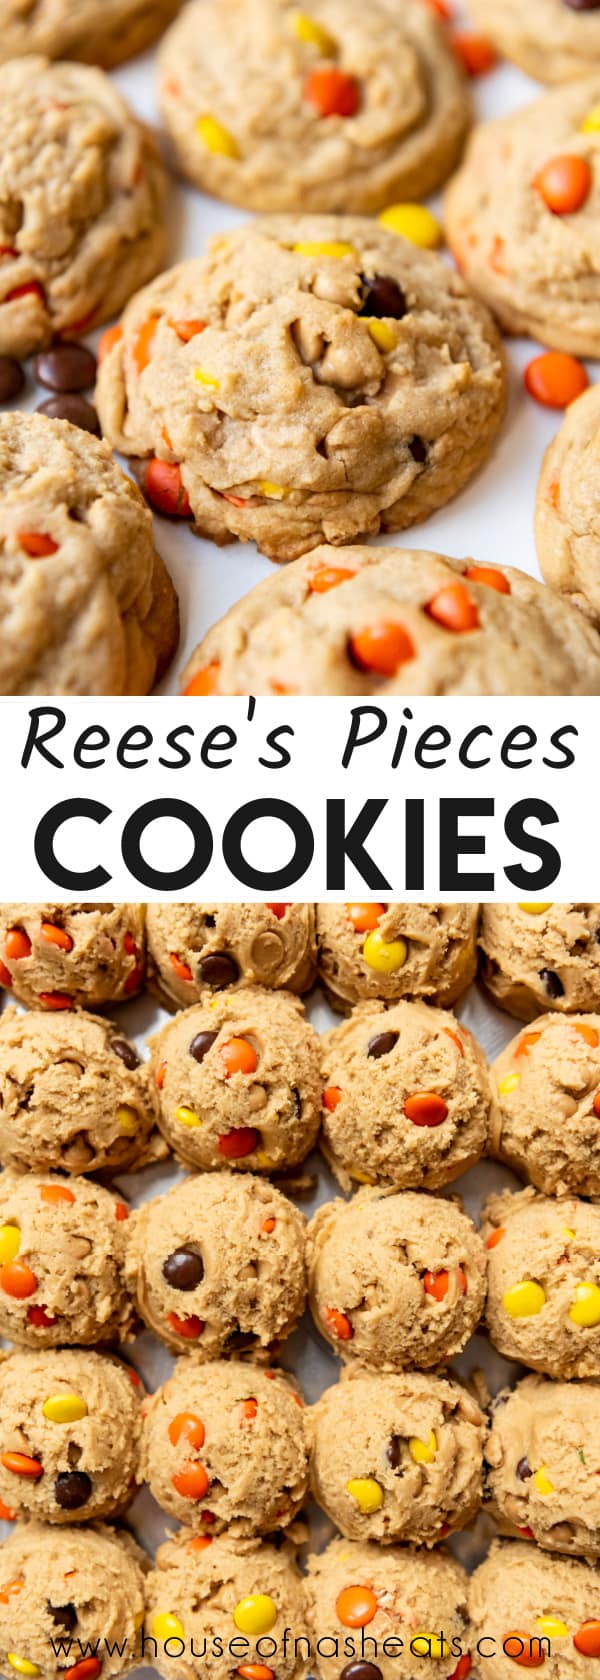 A collage of images of Reese's Pieces peanut butter cookies with text overlay.